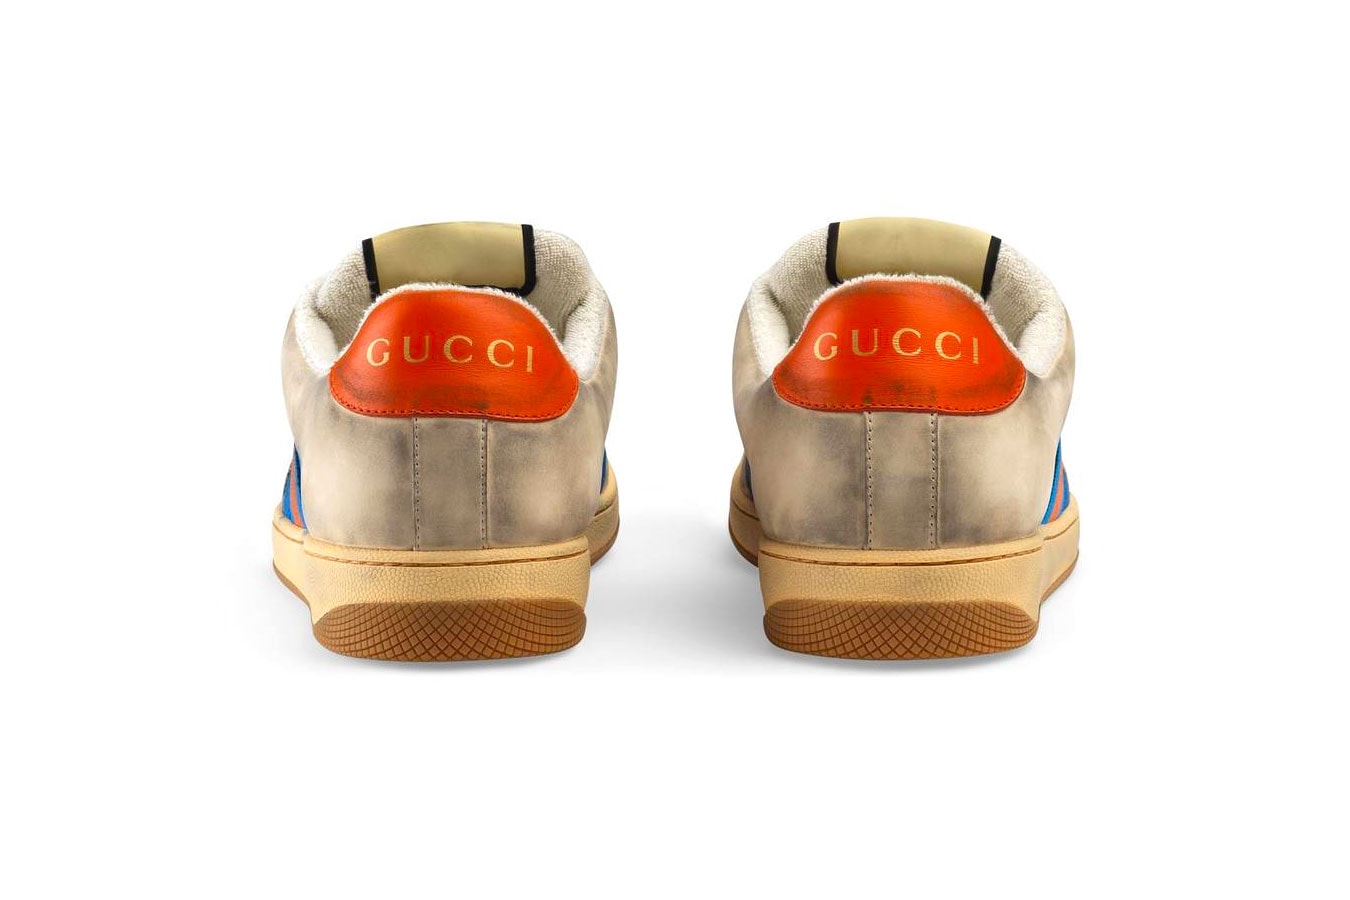 Gucci Mens Distressed GG Canvas Sneakers leather price Red Green Monogram Blue Orange Info Release Date